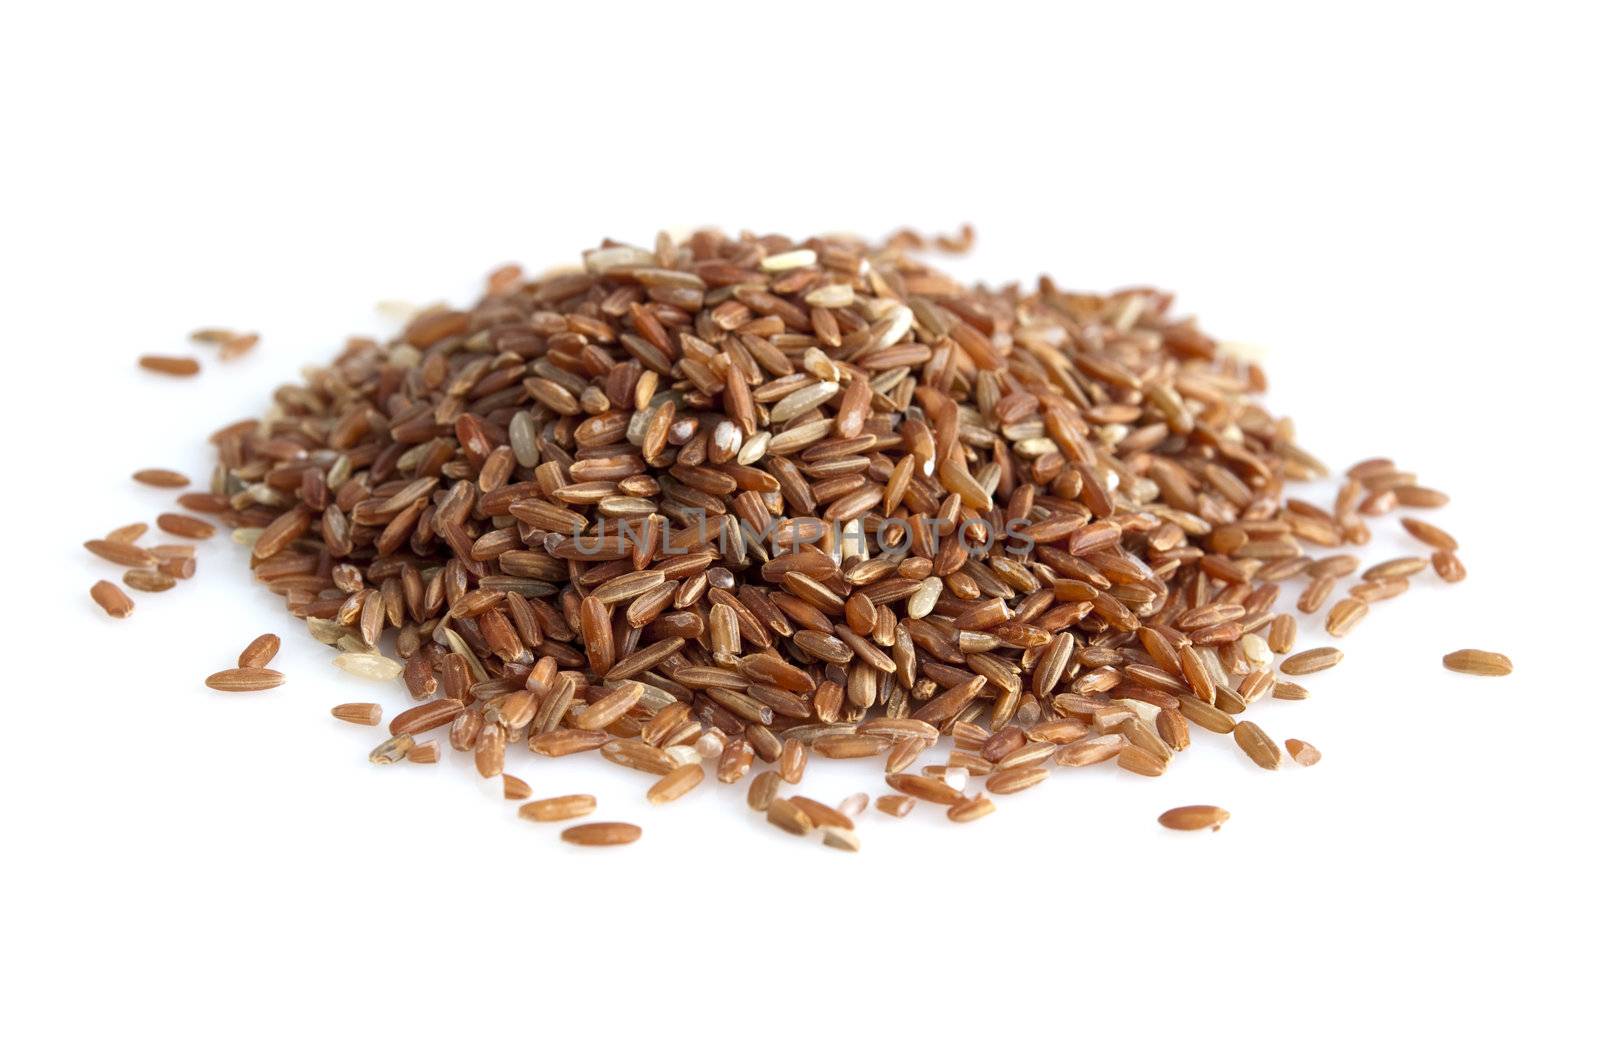 Unpolished red rice on white background. Product of Thailand, Asia.